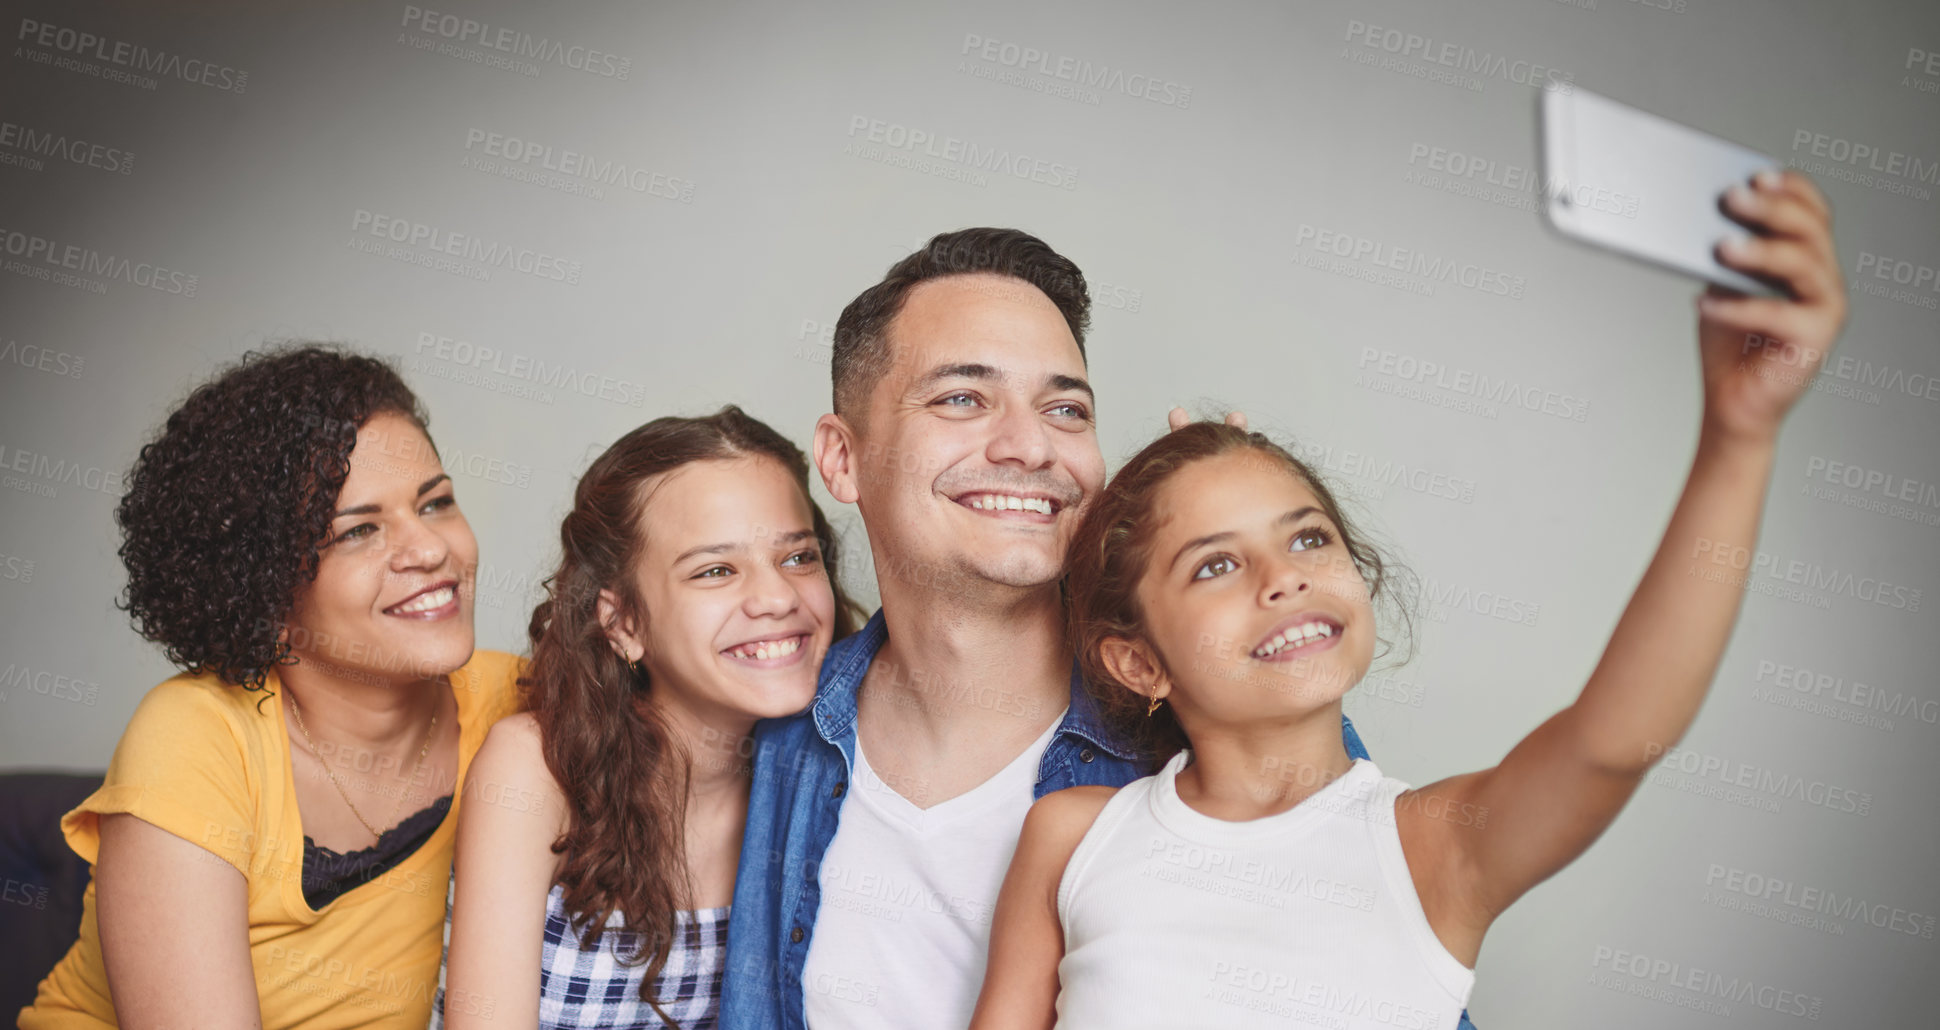 Buy stock photo Cropped shot of a happy family of four taking a selfie together